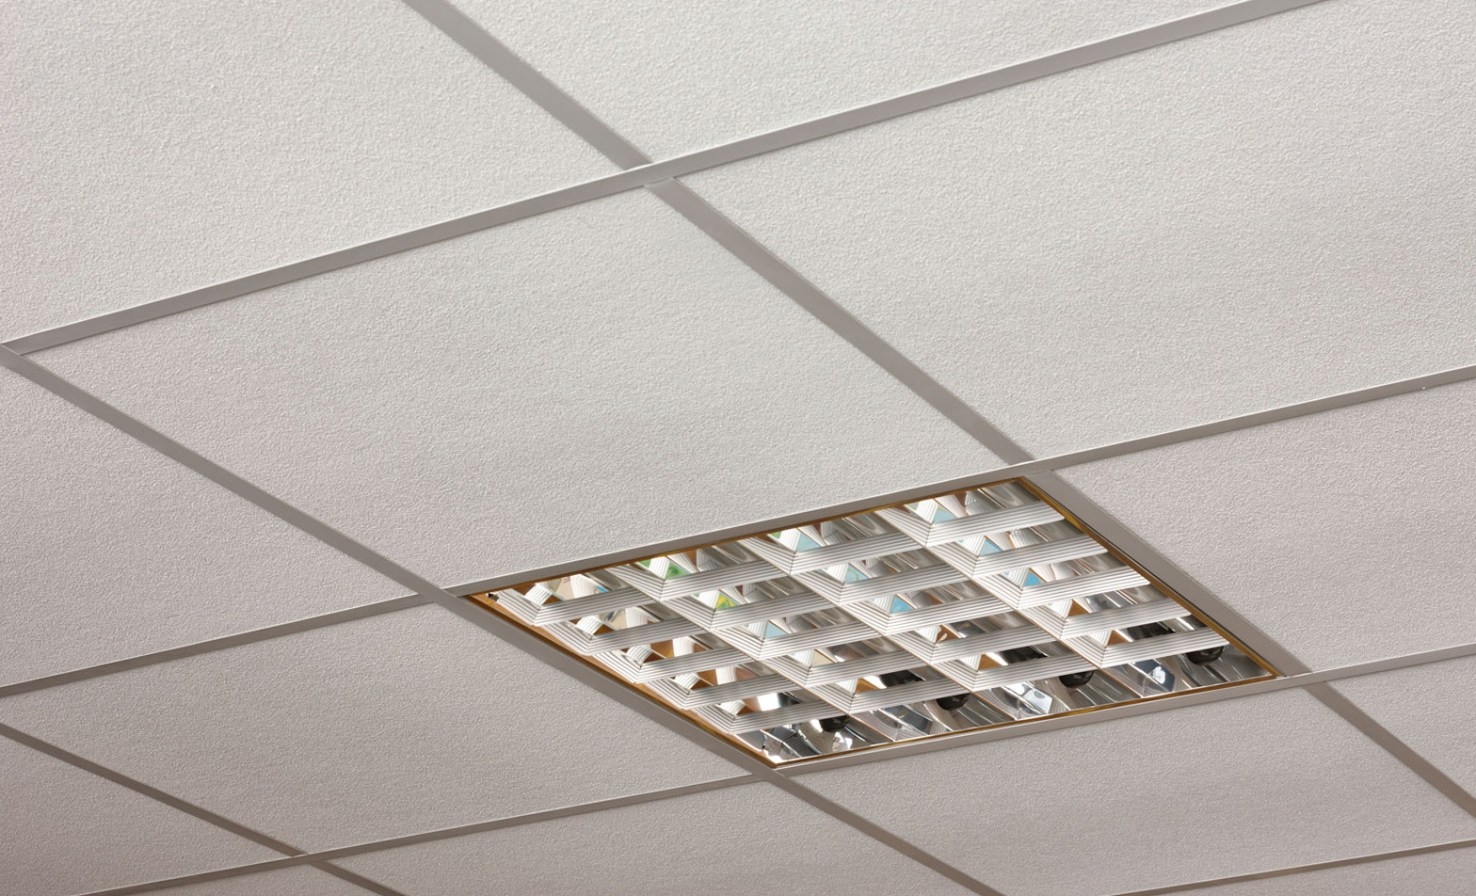 Permalink to Concealed Grid Suspended Ceiling Tiles